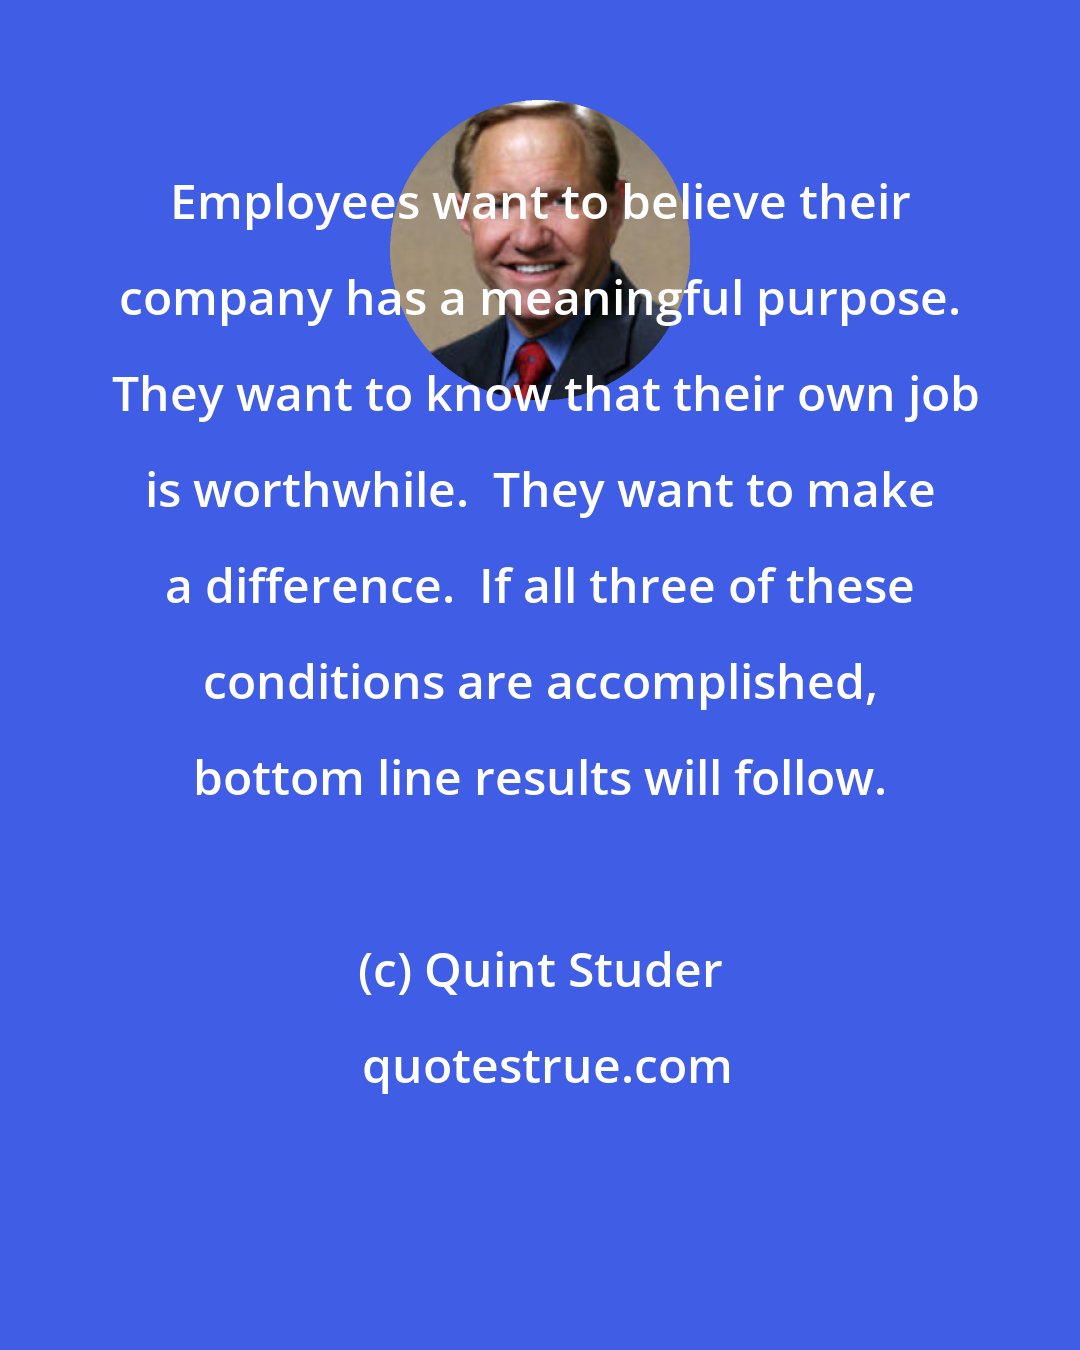 Quint Studer: Employees want to believe their company has a meaningful purpose.  They want to know that their own job is worthwhile.  They want to make a difference.  If all three of these conditions are accomplished, bottom line results will follow.